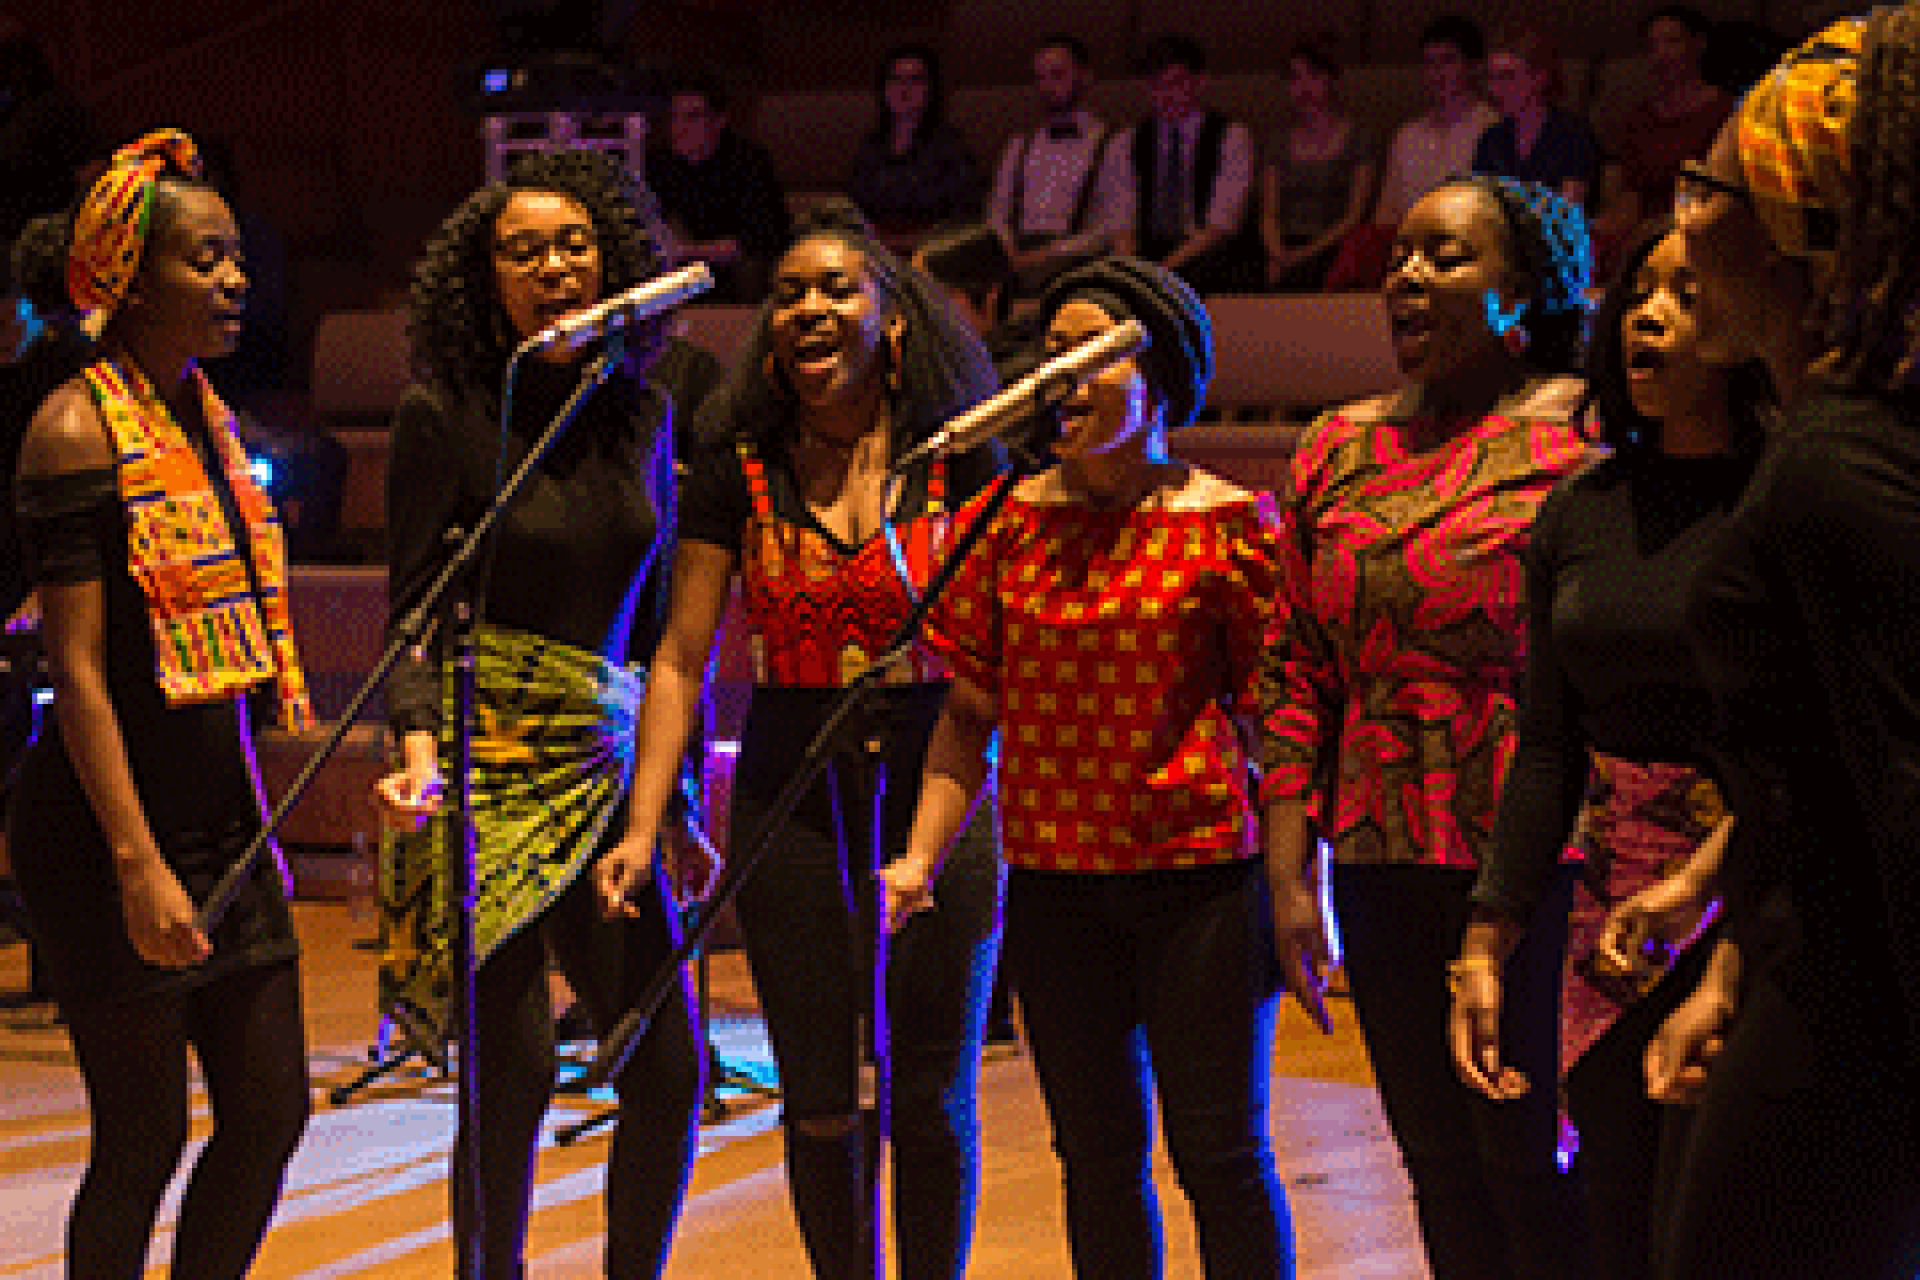 Group of singers performing in a concert-hall